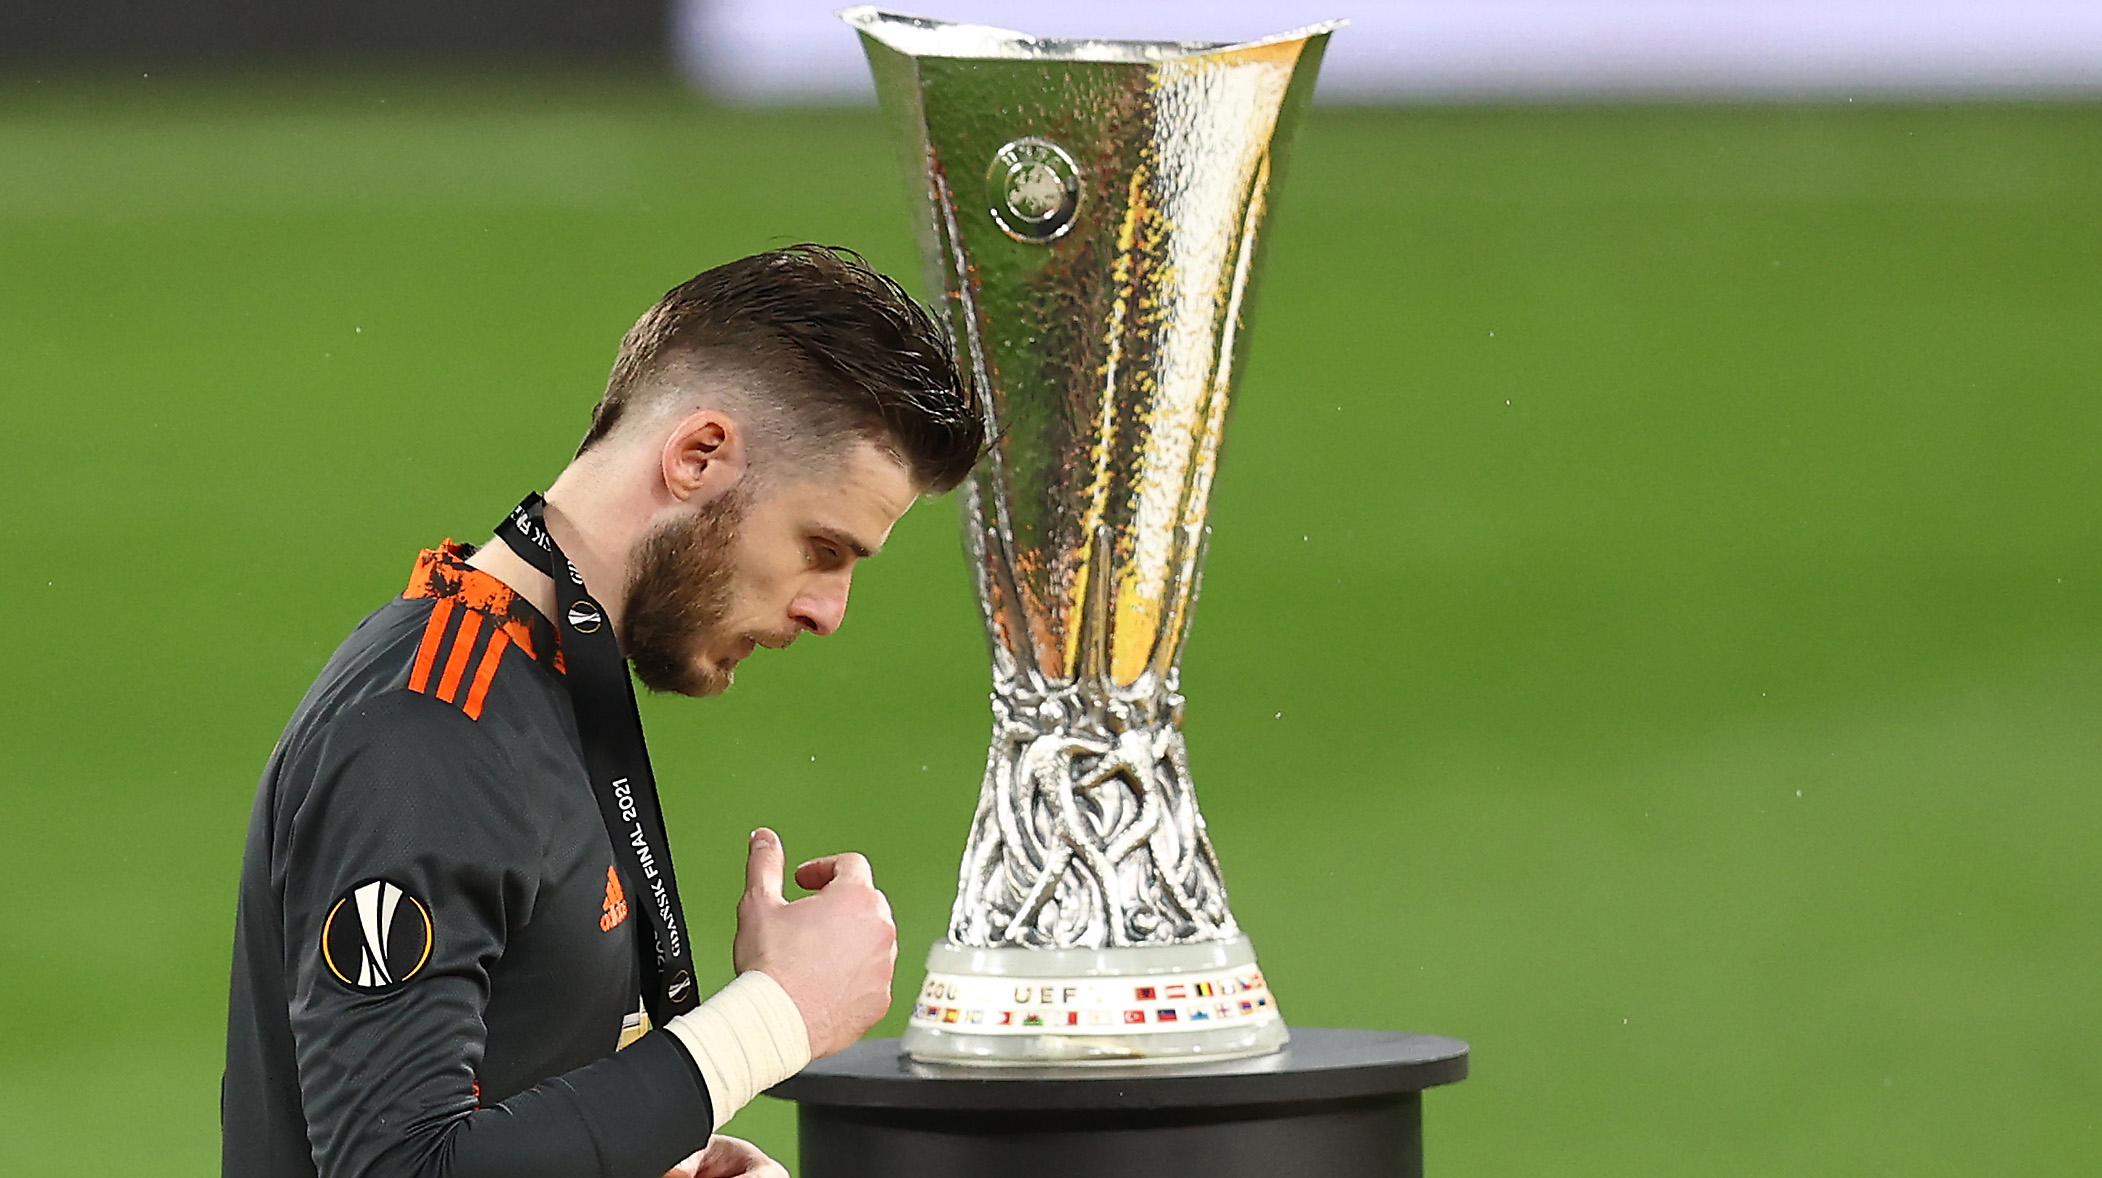 David De Gea of Manchester United removes their medal as they make their way past the UEFA Europa League Trophy following the UEFA Europa League Final between Villarreal CF and Manchester United at Gdansk Arena on May 26, 2021 in Gdansk, Poland